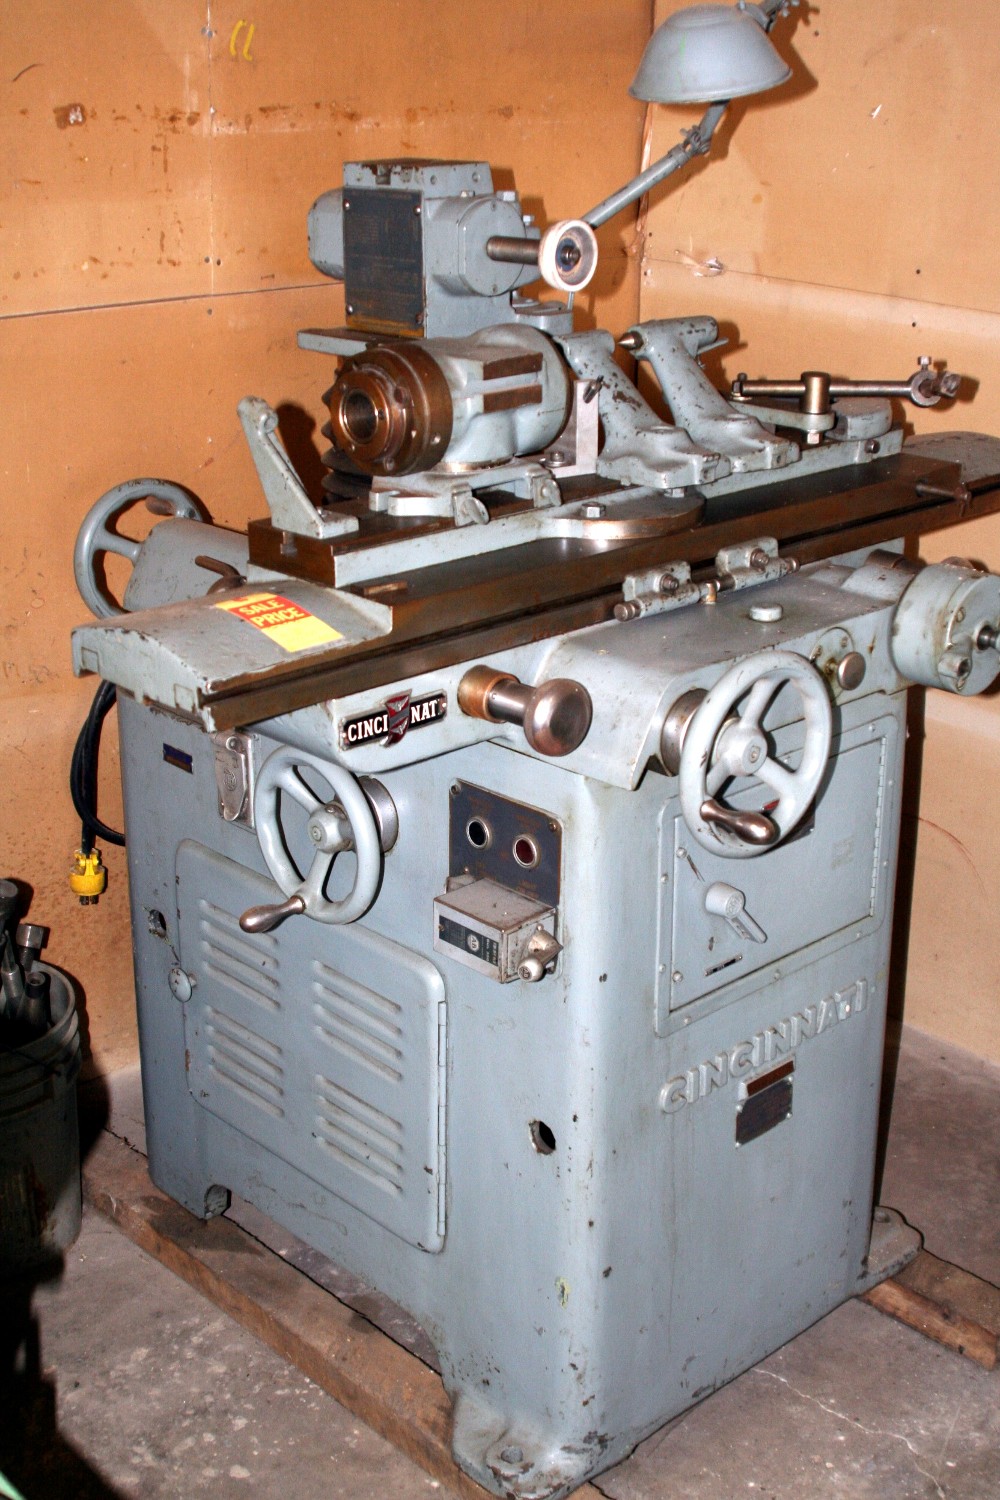 Cincinnati no.2 (English made?) tool and cutter grinder - buy or pass?